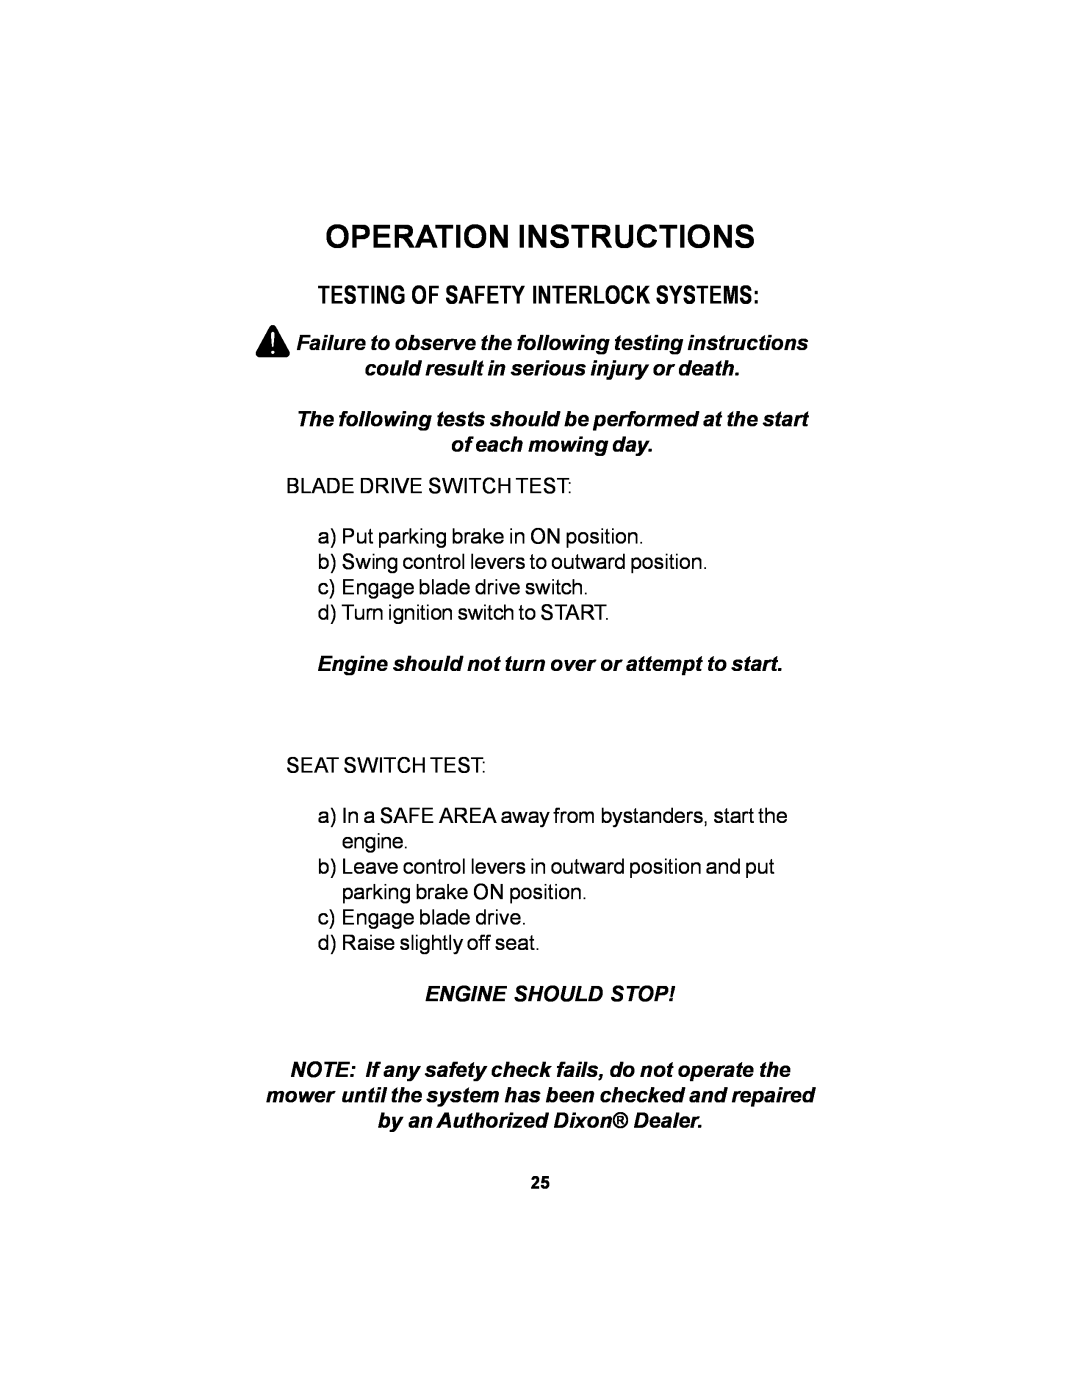 Dixon ELS 60 manual Operation Instructions, Testing Of Safety Interlock Systems 